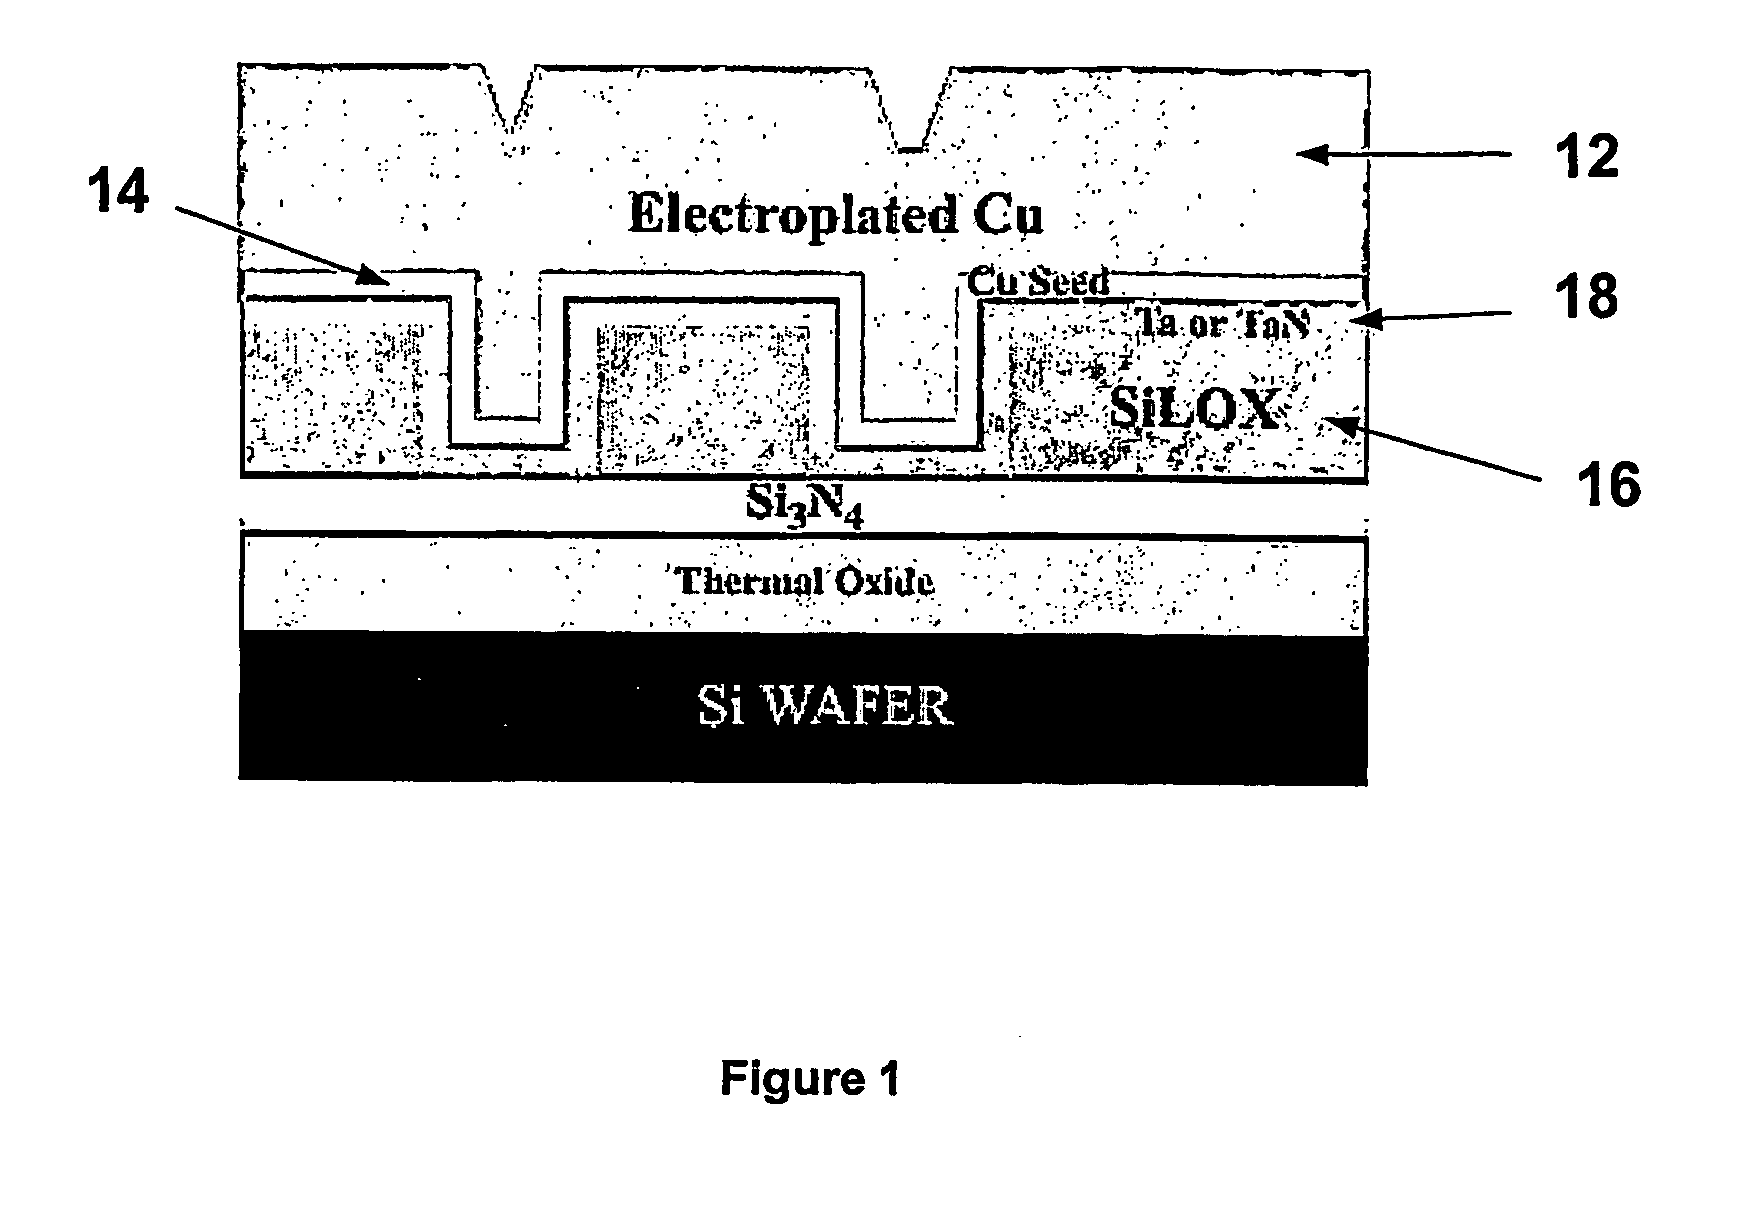 Chemical mechanical polishing compositions for step-ll copper line and other associated materials and method of using same